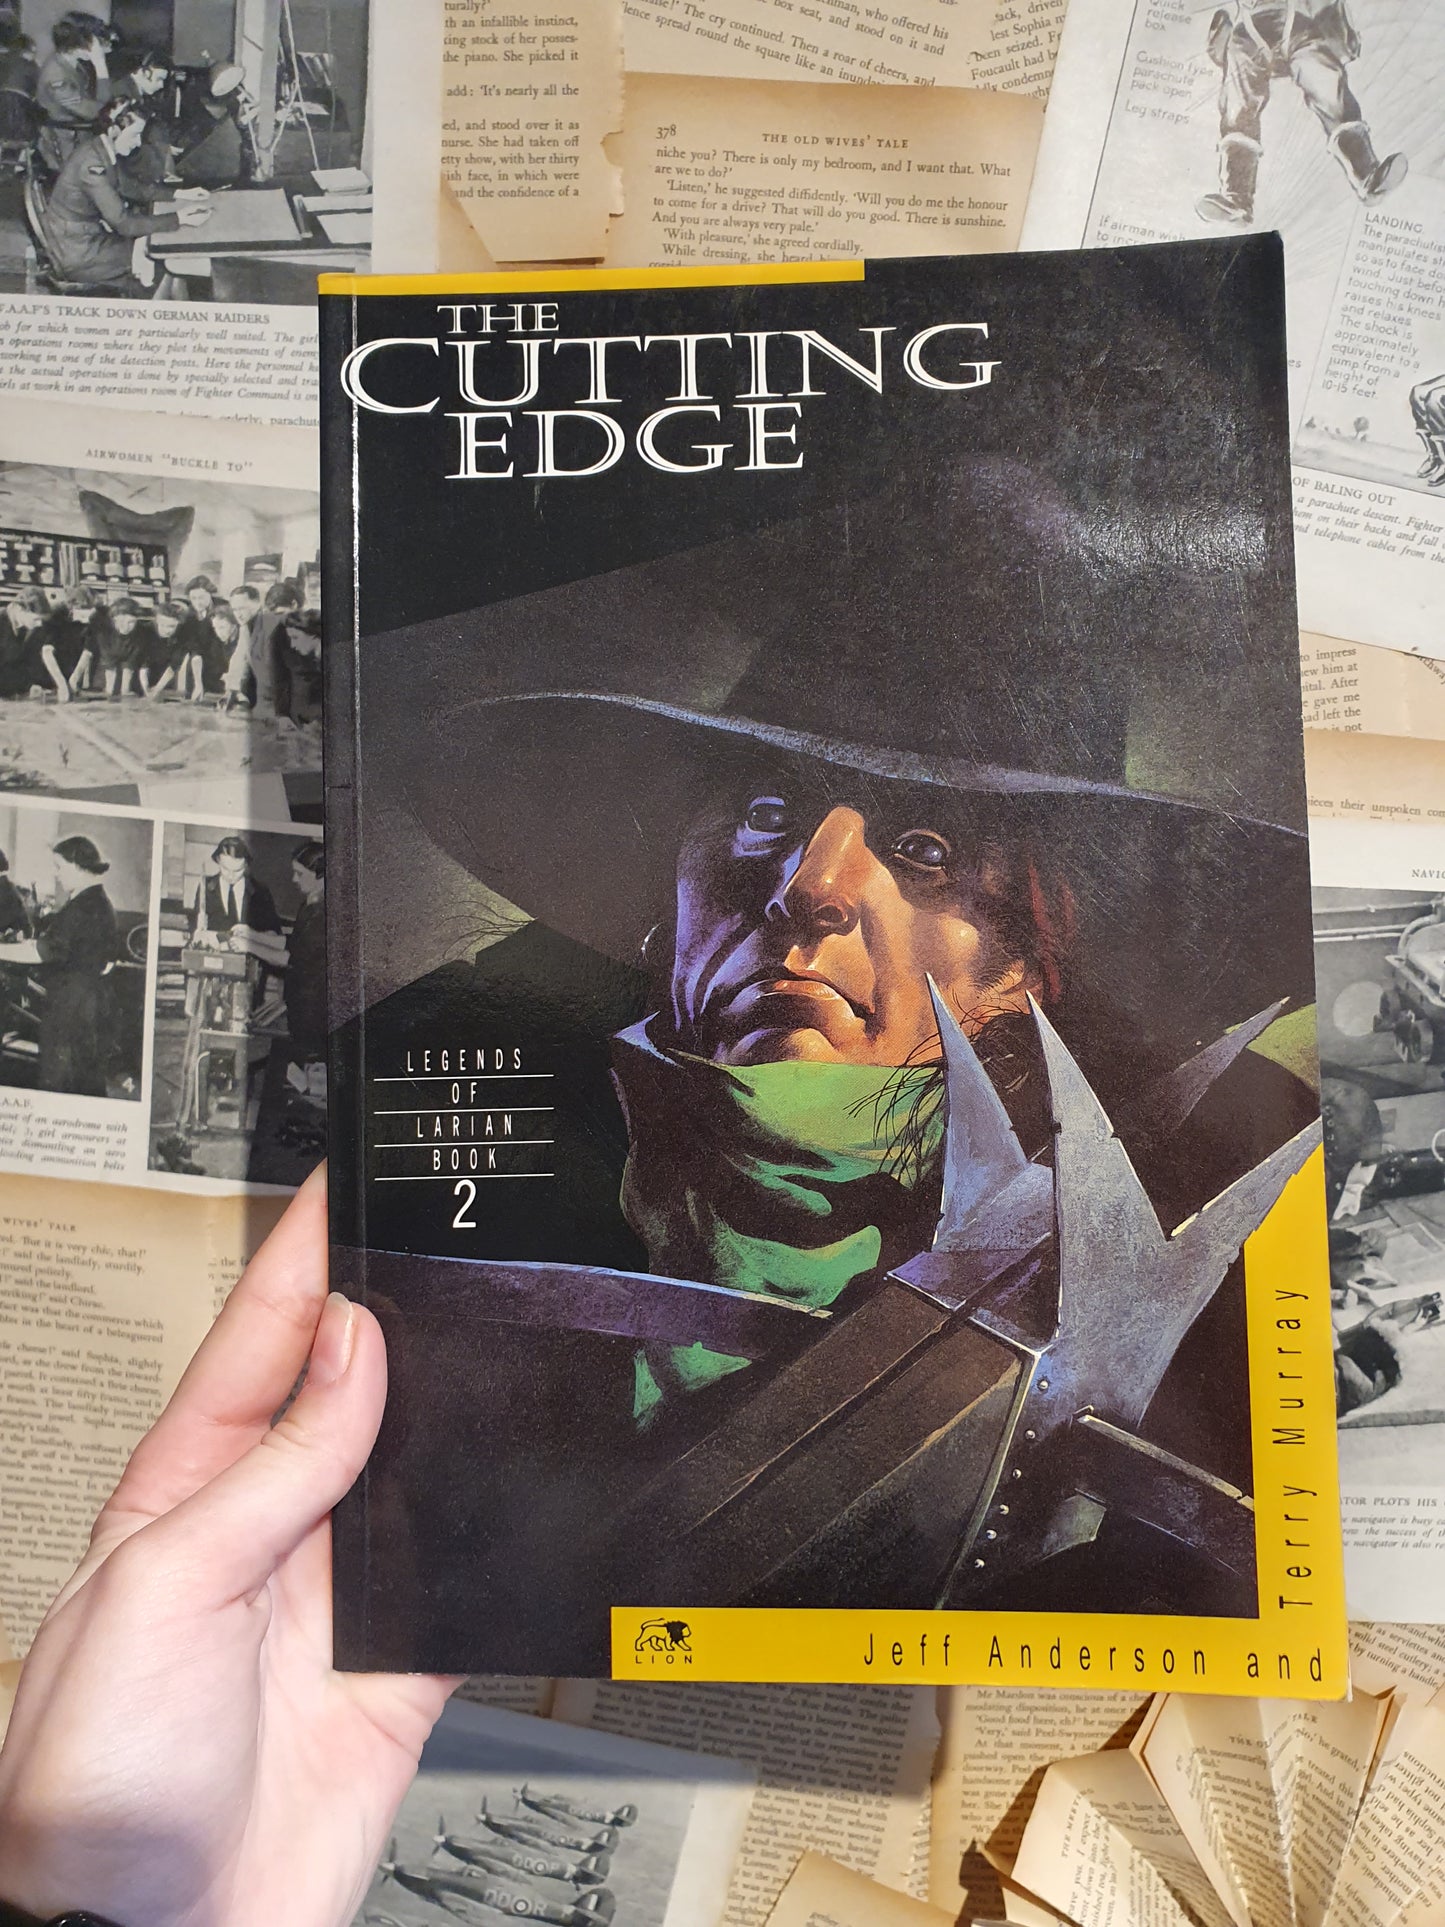 Legends of Lirian Book 2: The Cutting Edge by Anderson & Murray (1993)